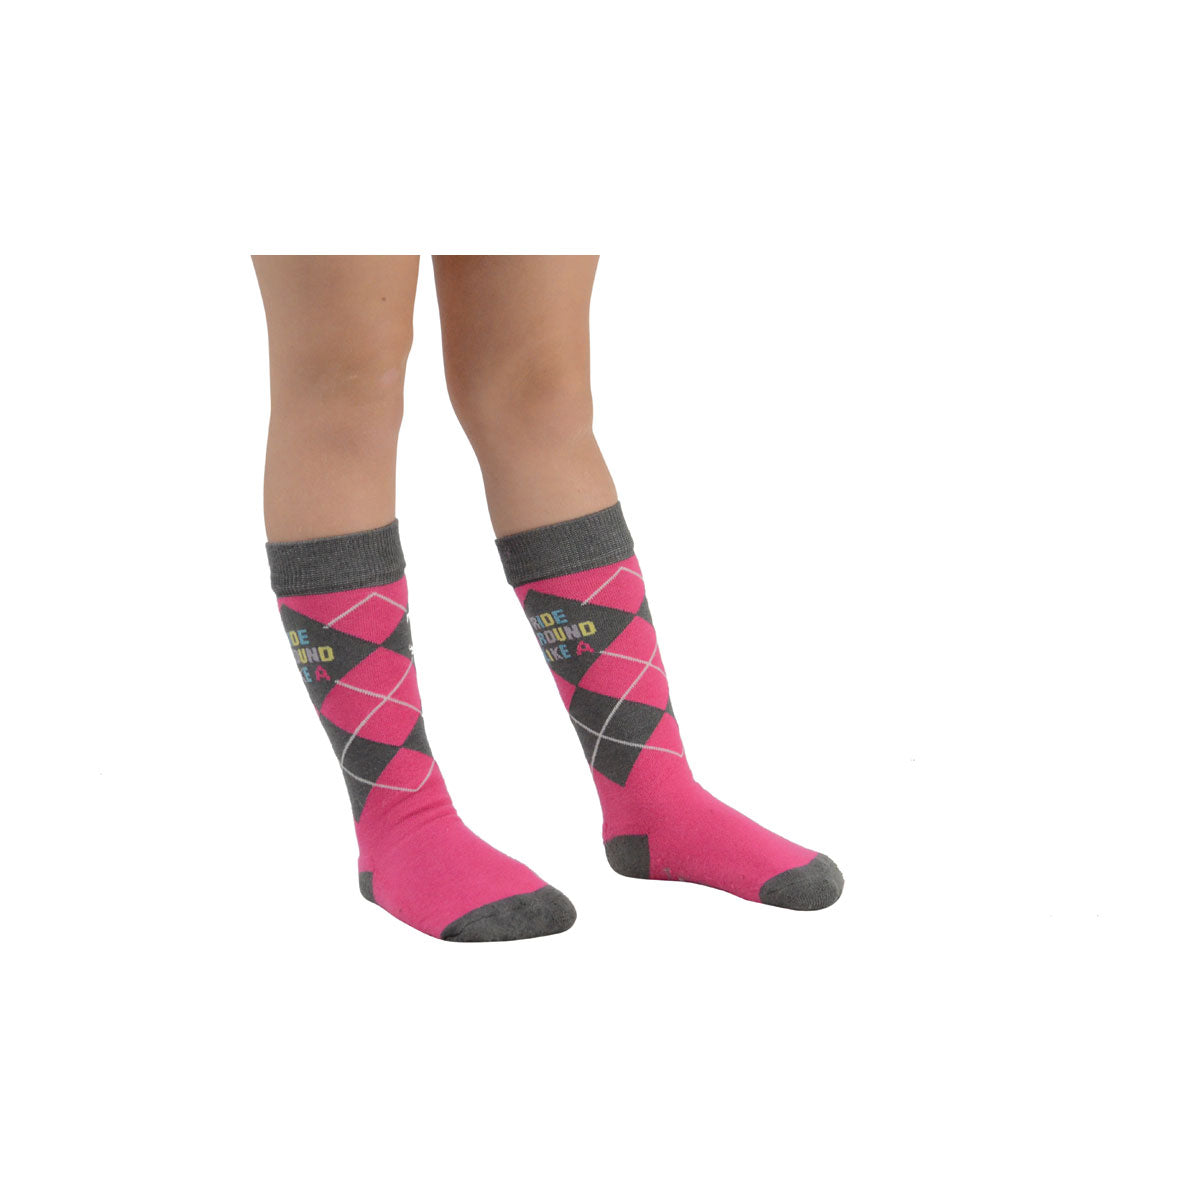 Merry Go Round Socks by Little Rider (Pack of 3)